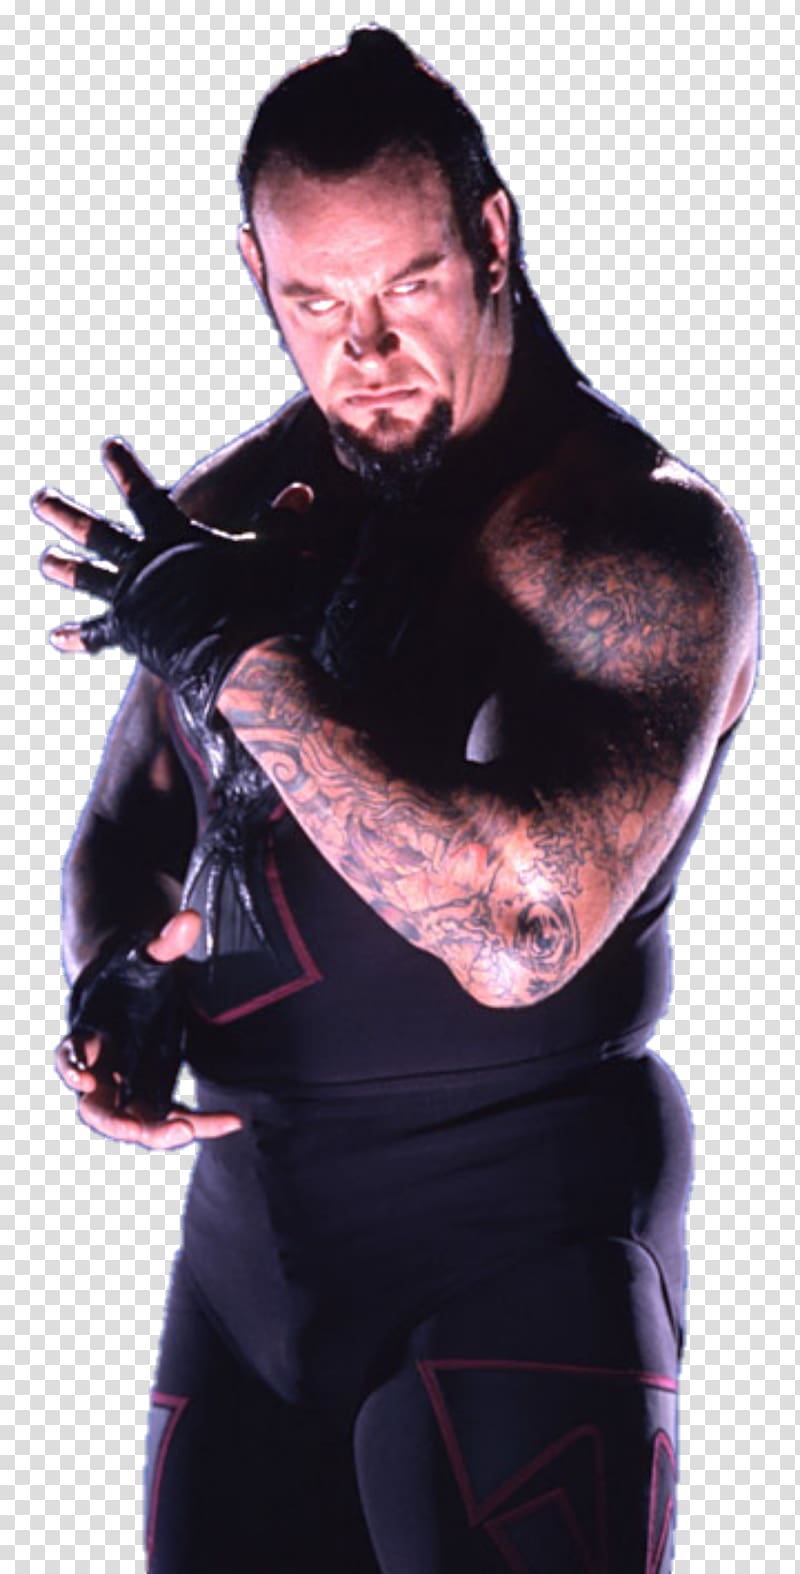 What does the Undertakers BSK tattoo stand for